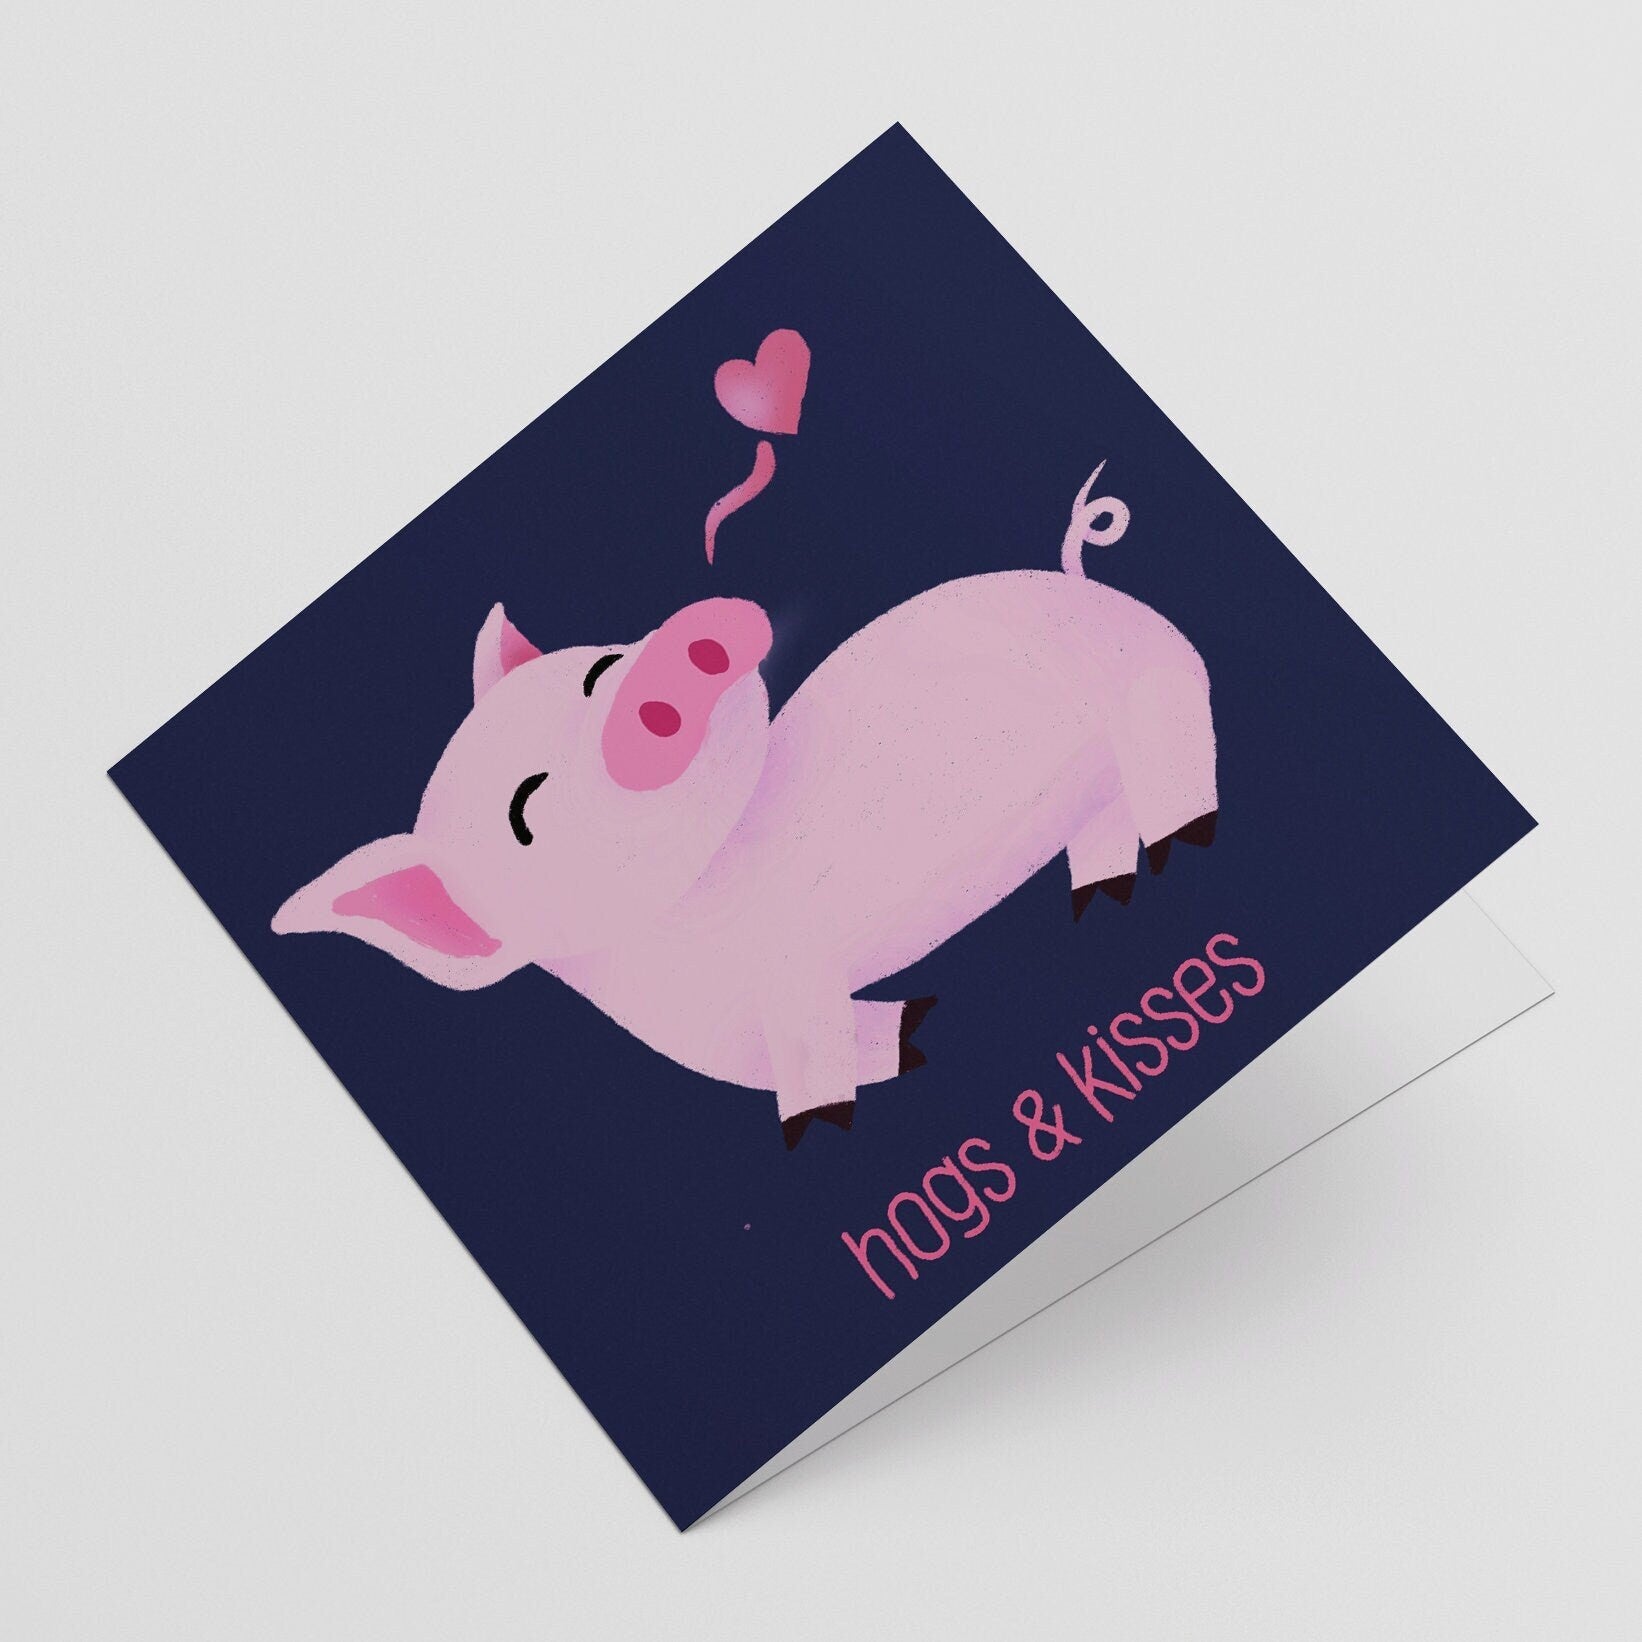 Hogs & Kisses - Any Occasion Greeting Card, Greeting Cards/Postcards, Greeting & Note Cards